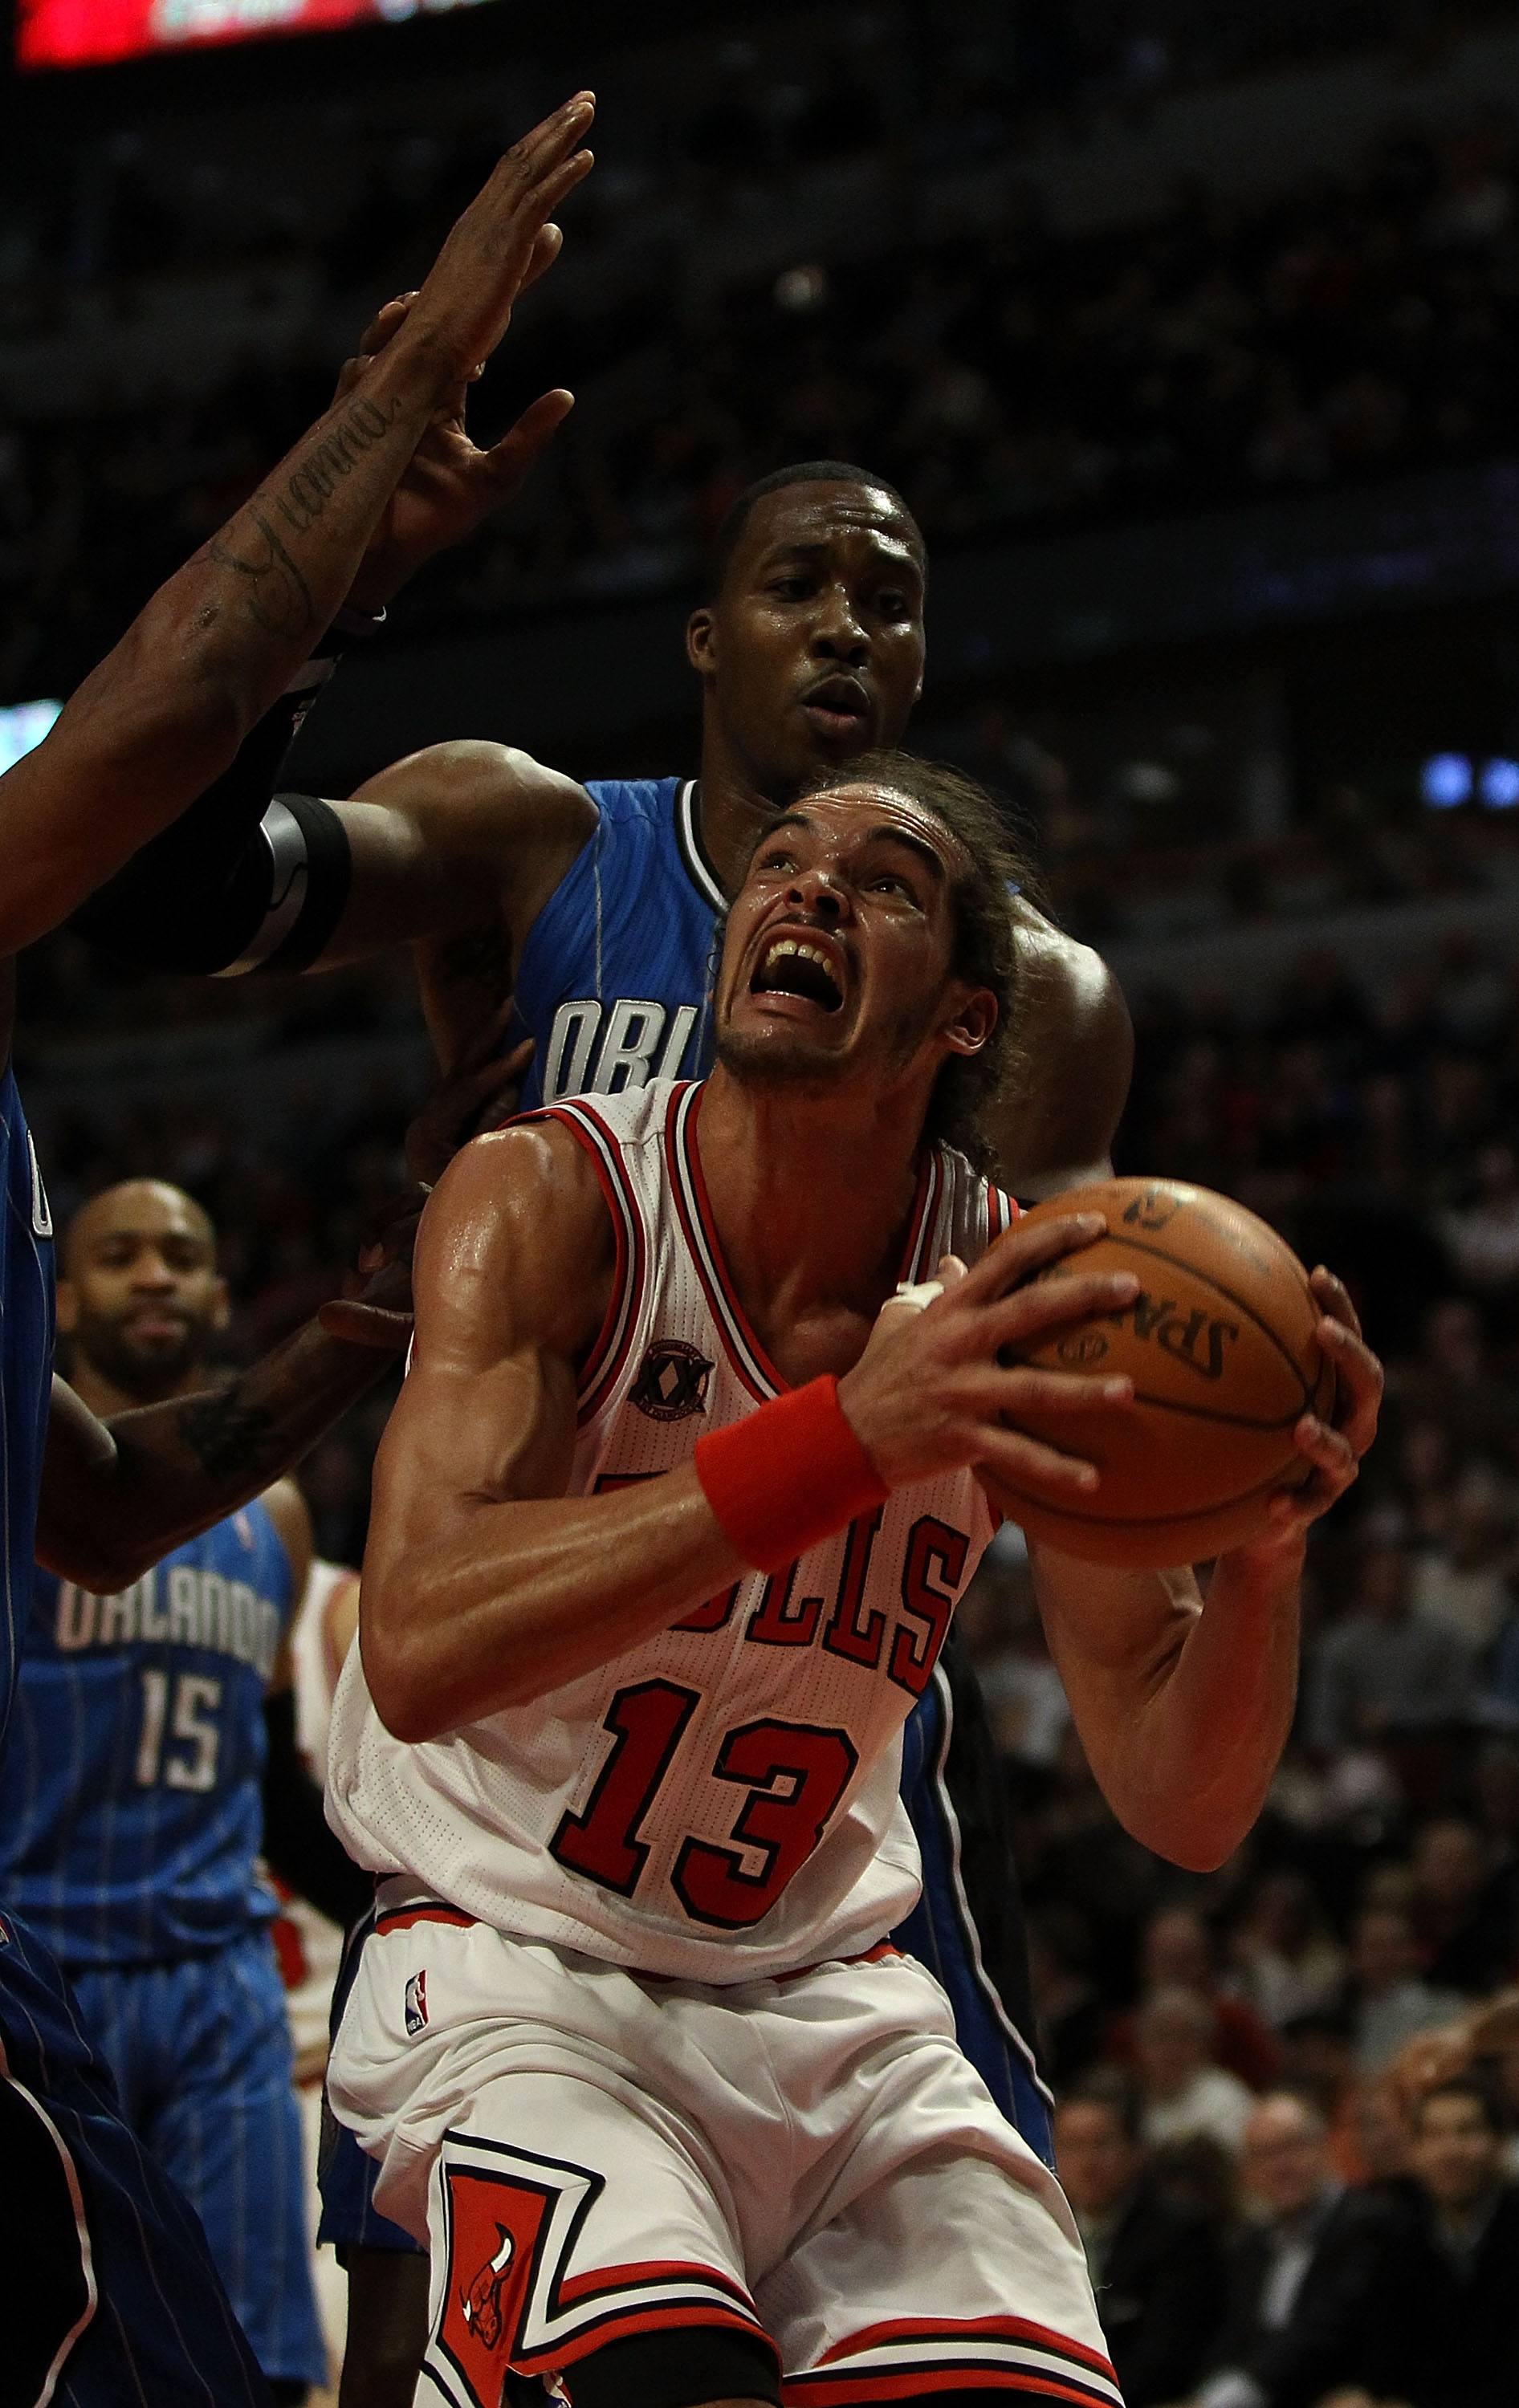 CHICAGO, IL - DECEMBER 01: Joakim Noah #13 of the Chicago Bulls goes up for a shot against Dwight Howard #12 of the Orlando Magic at the United Center on December 1, 2010 in Chicago, Illinois. The Magic defeated the Bulls 107-78. NOTE TO USER: User expres